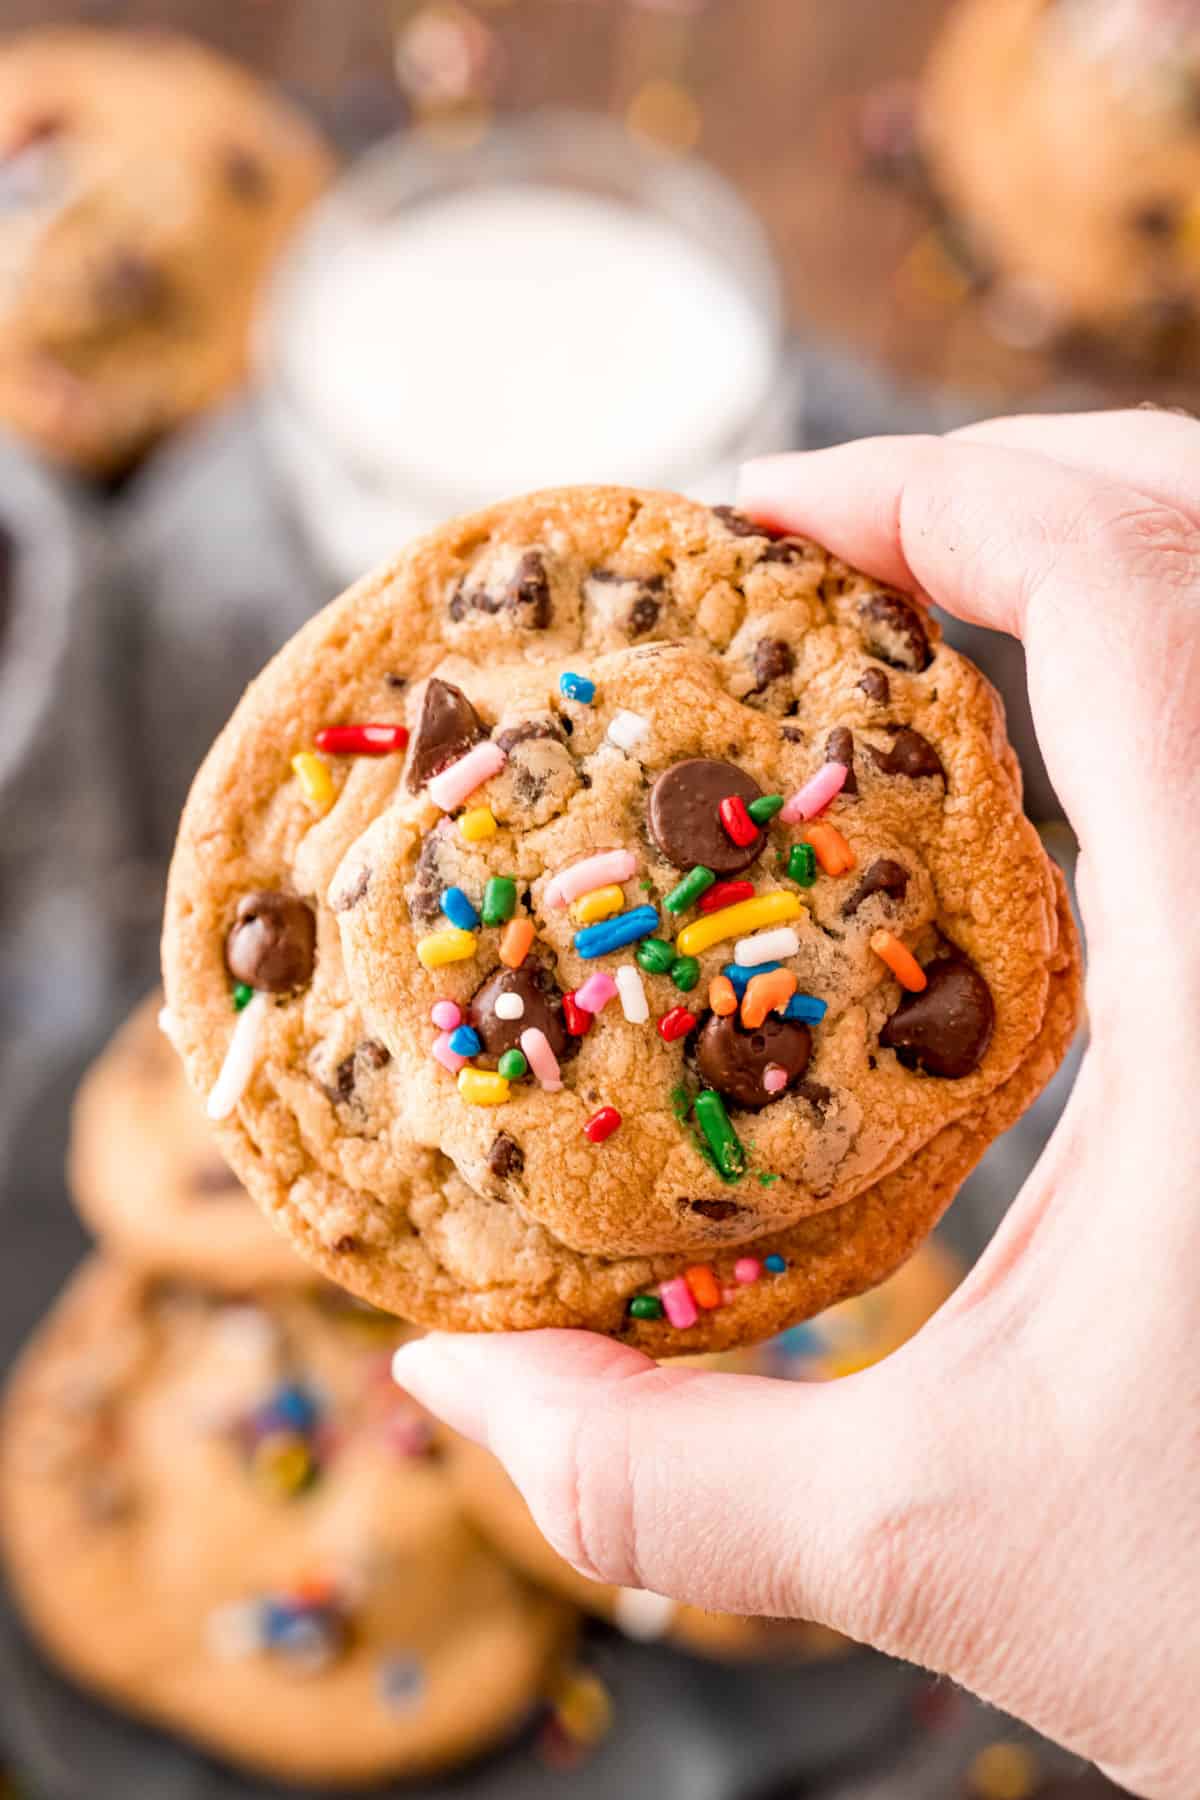 Oreo stuffed cookie with sprinkles being held up in a hand,